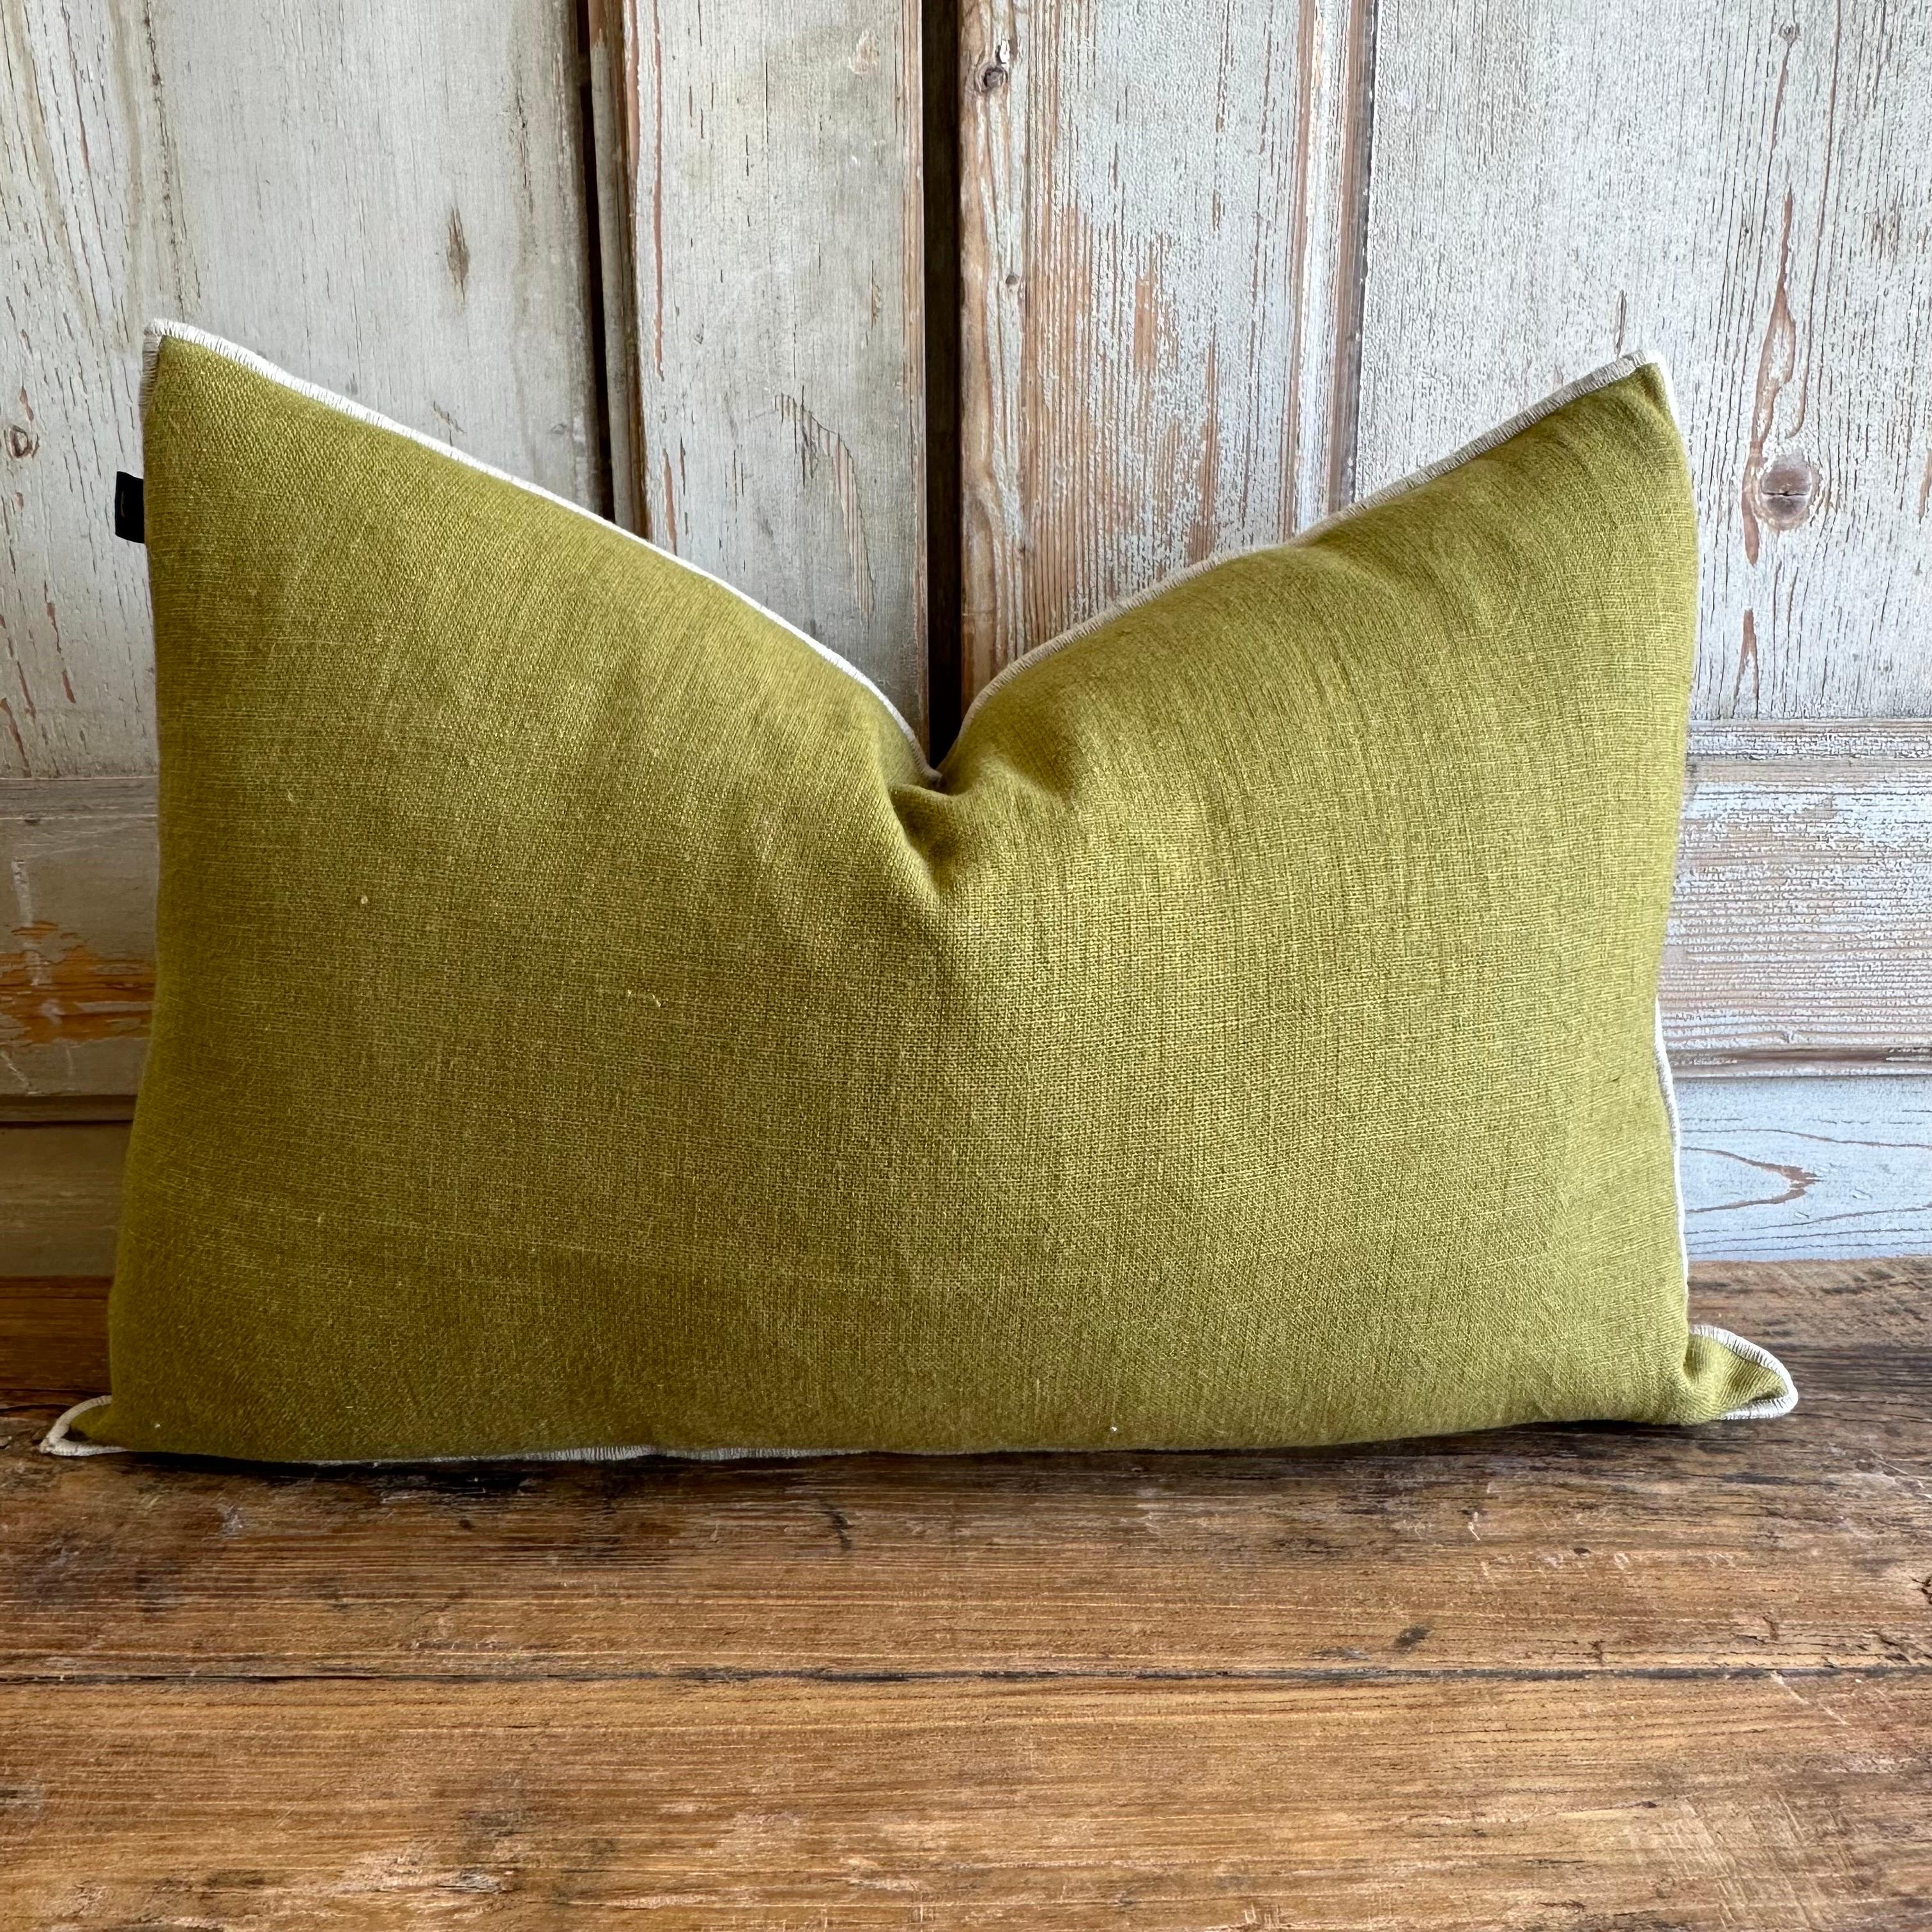 A Beautiful 100% linen pillow with decorative stitched edge. 
Zipper closure, 90/10 down feather pillow is included. 
Size: 16×24 
Color: OLIVE; a vibrant green with a natural binded edge. 
Composition 100% Linen, natural finish, EUROPEAN FLAX LABEL.